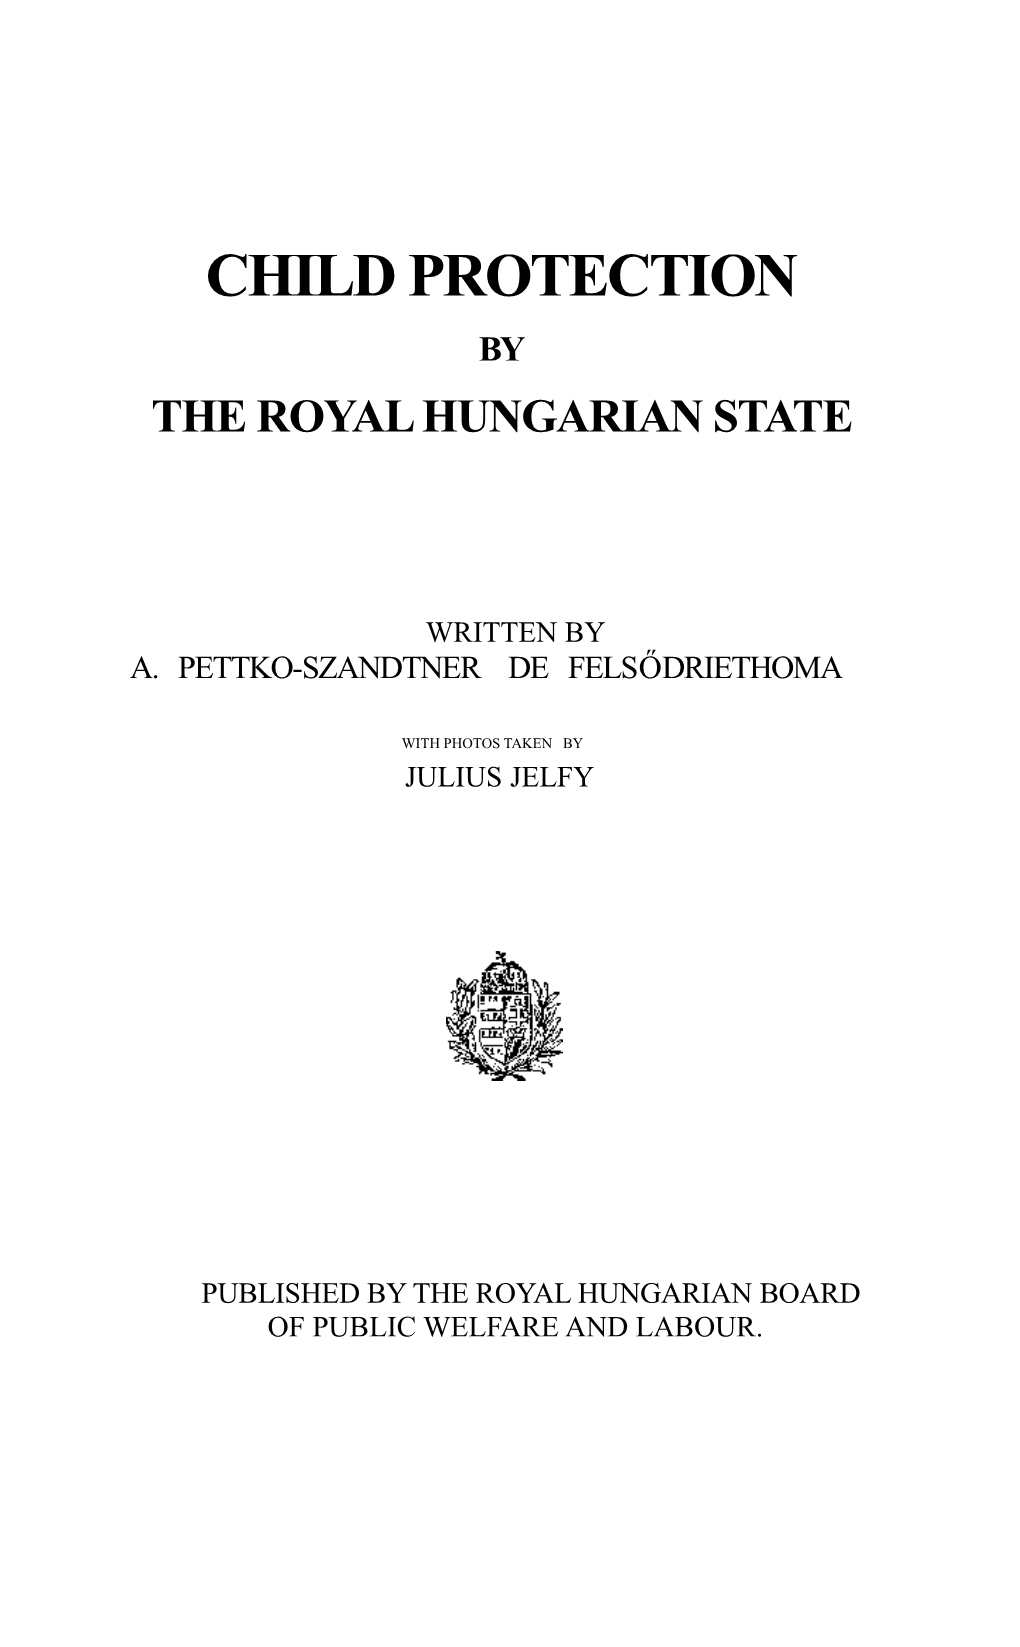 Child Protection by the Royal Hungarian State